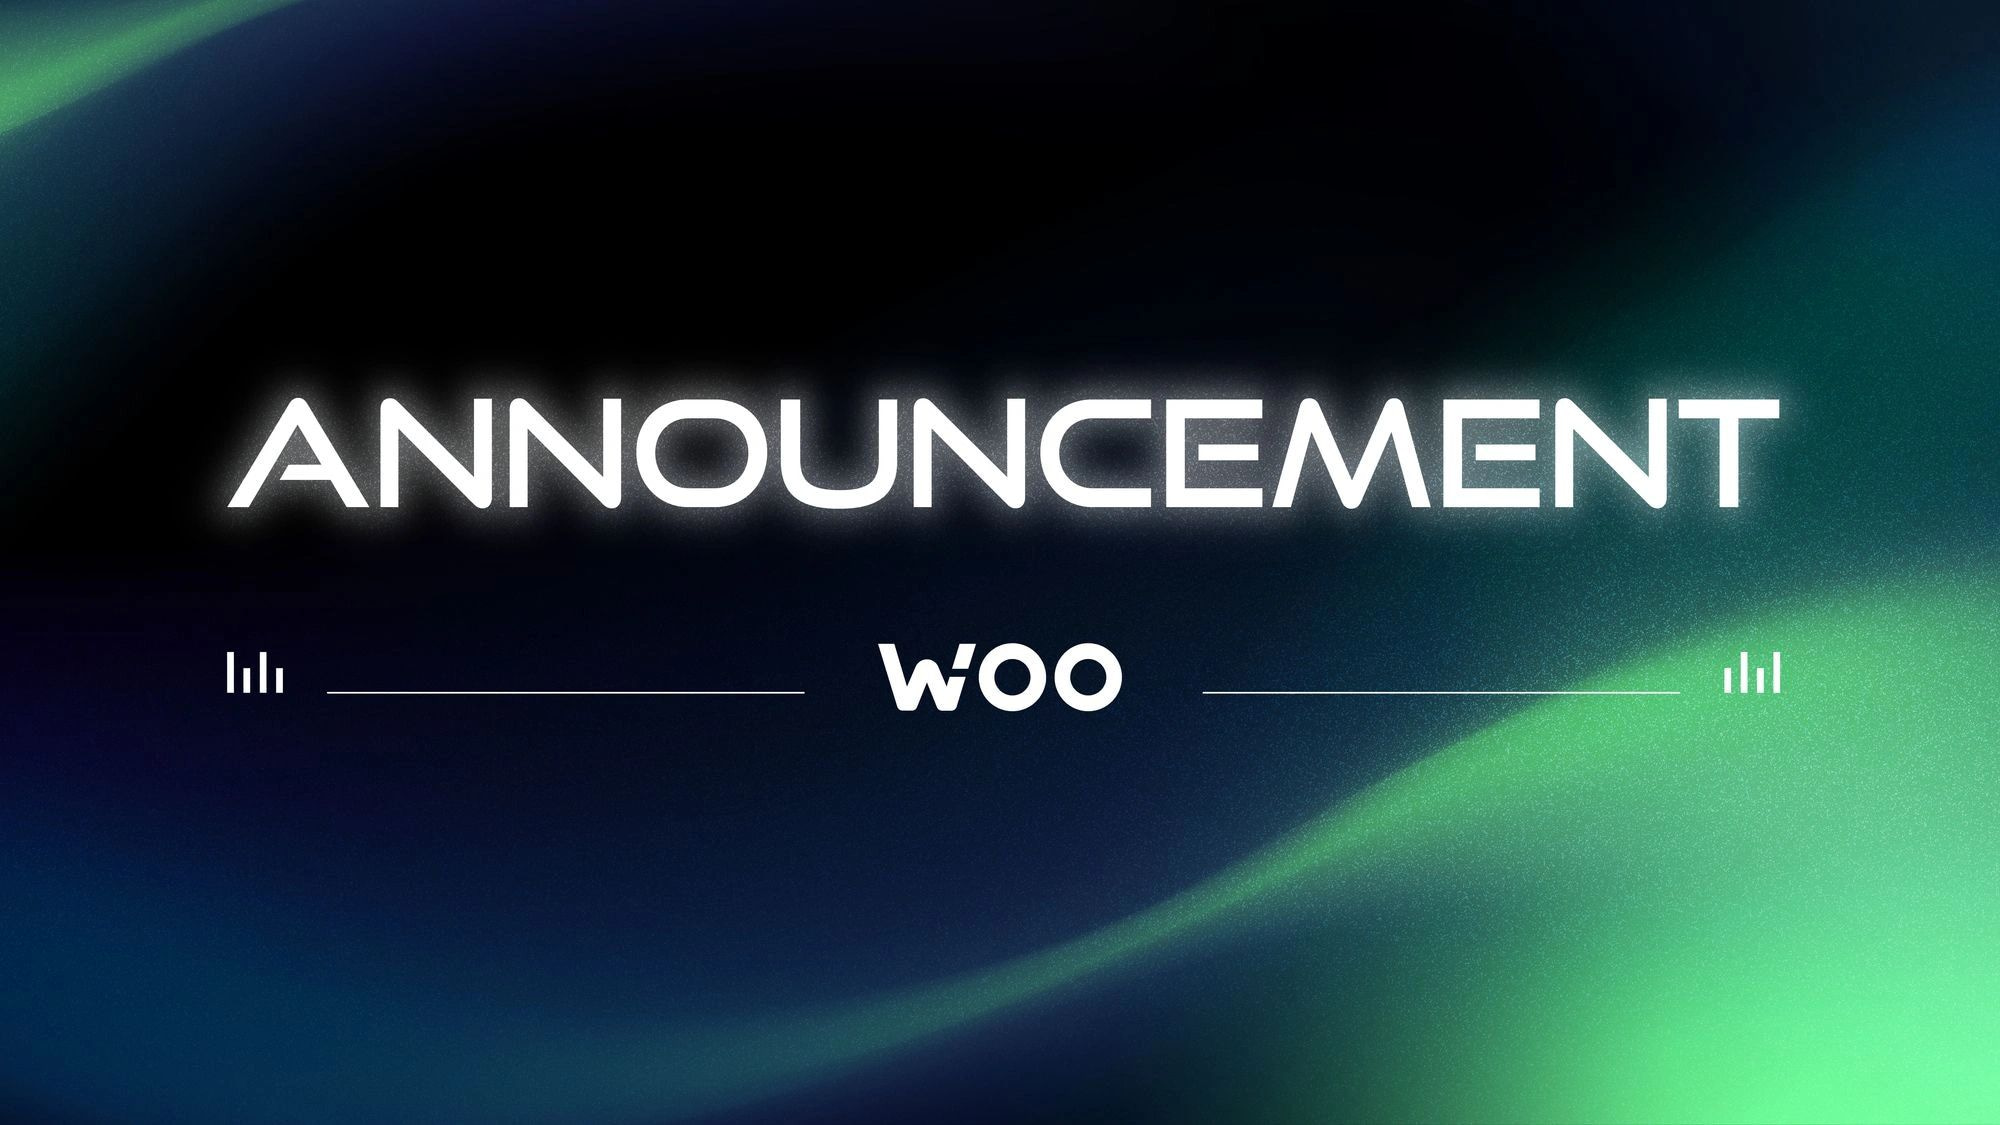 WOO repurchases shares and tokens from collapsed Three Arrows Capital